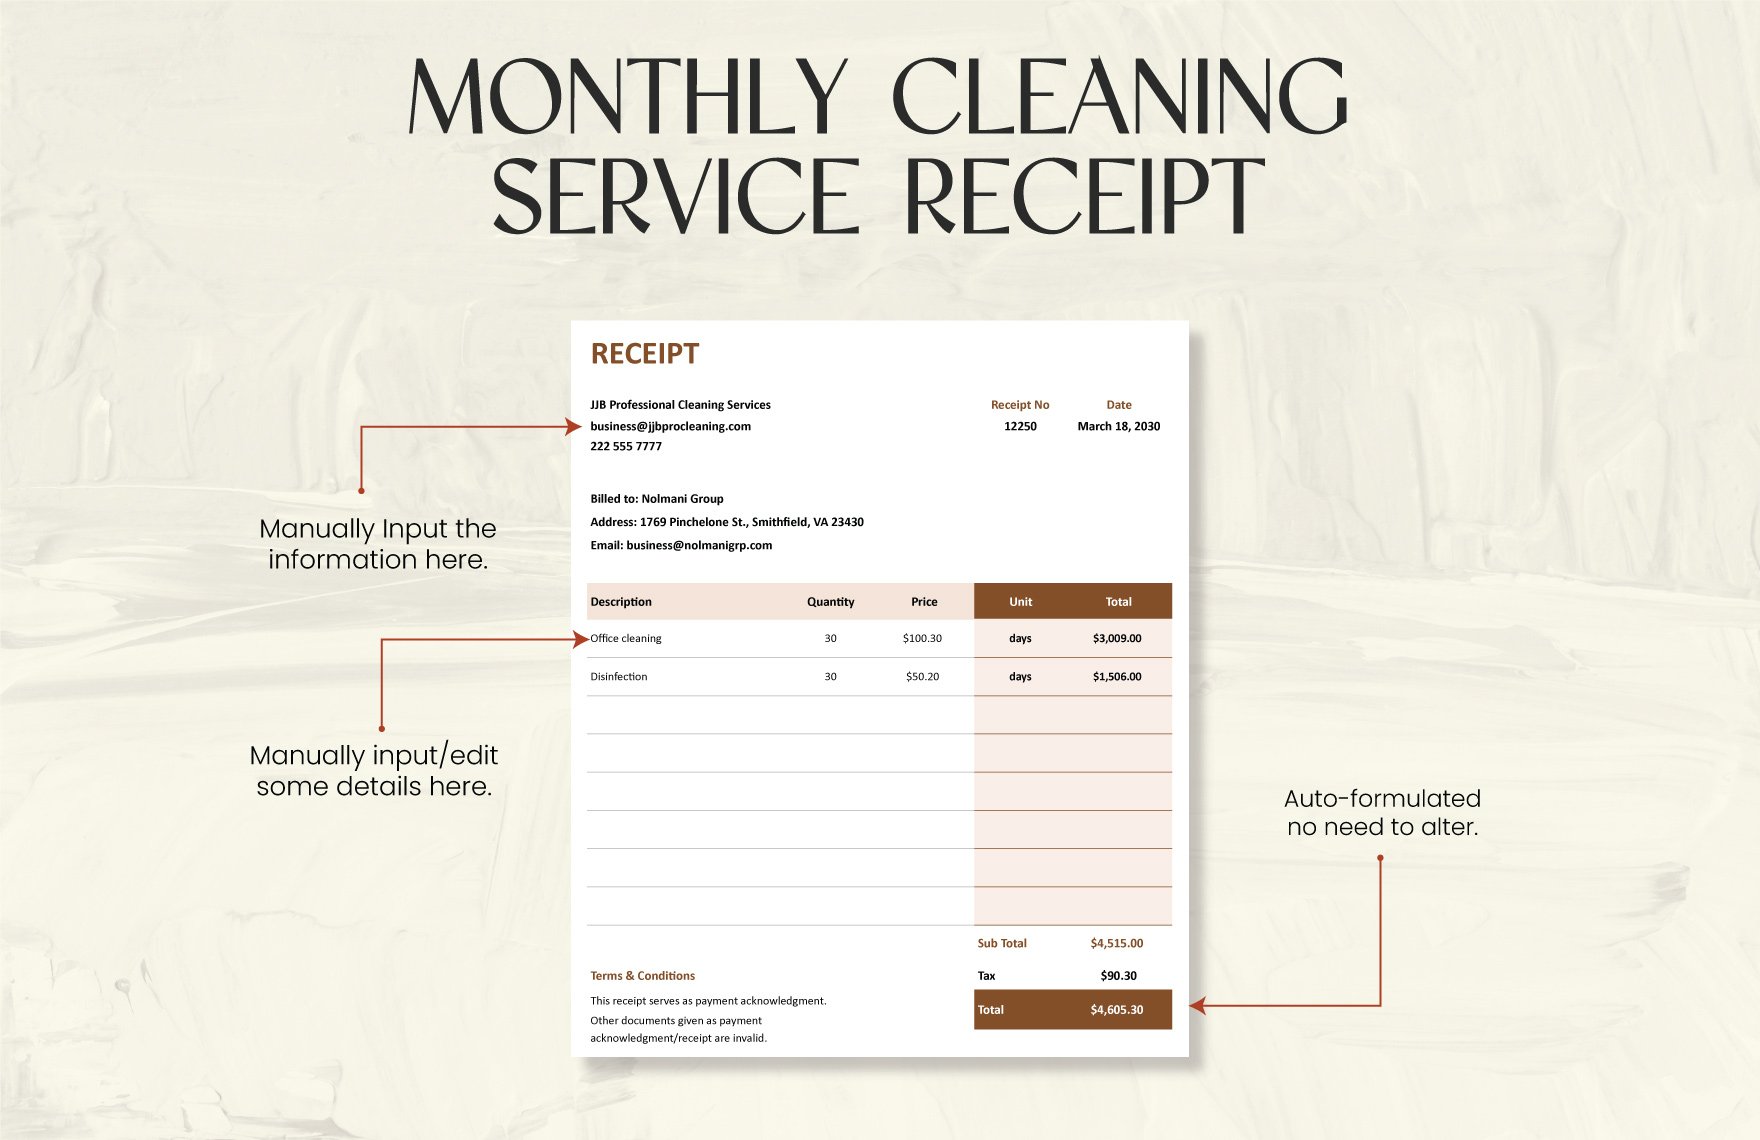 Monthly Cleaning Service Receipt Template